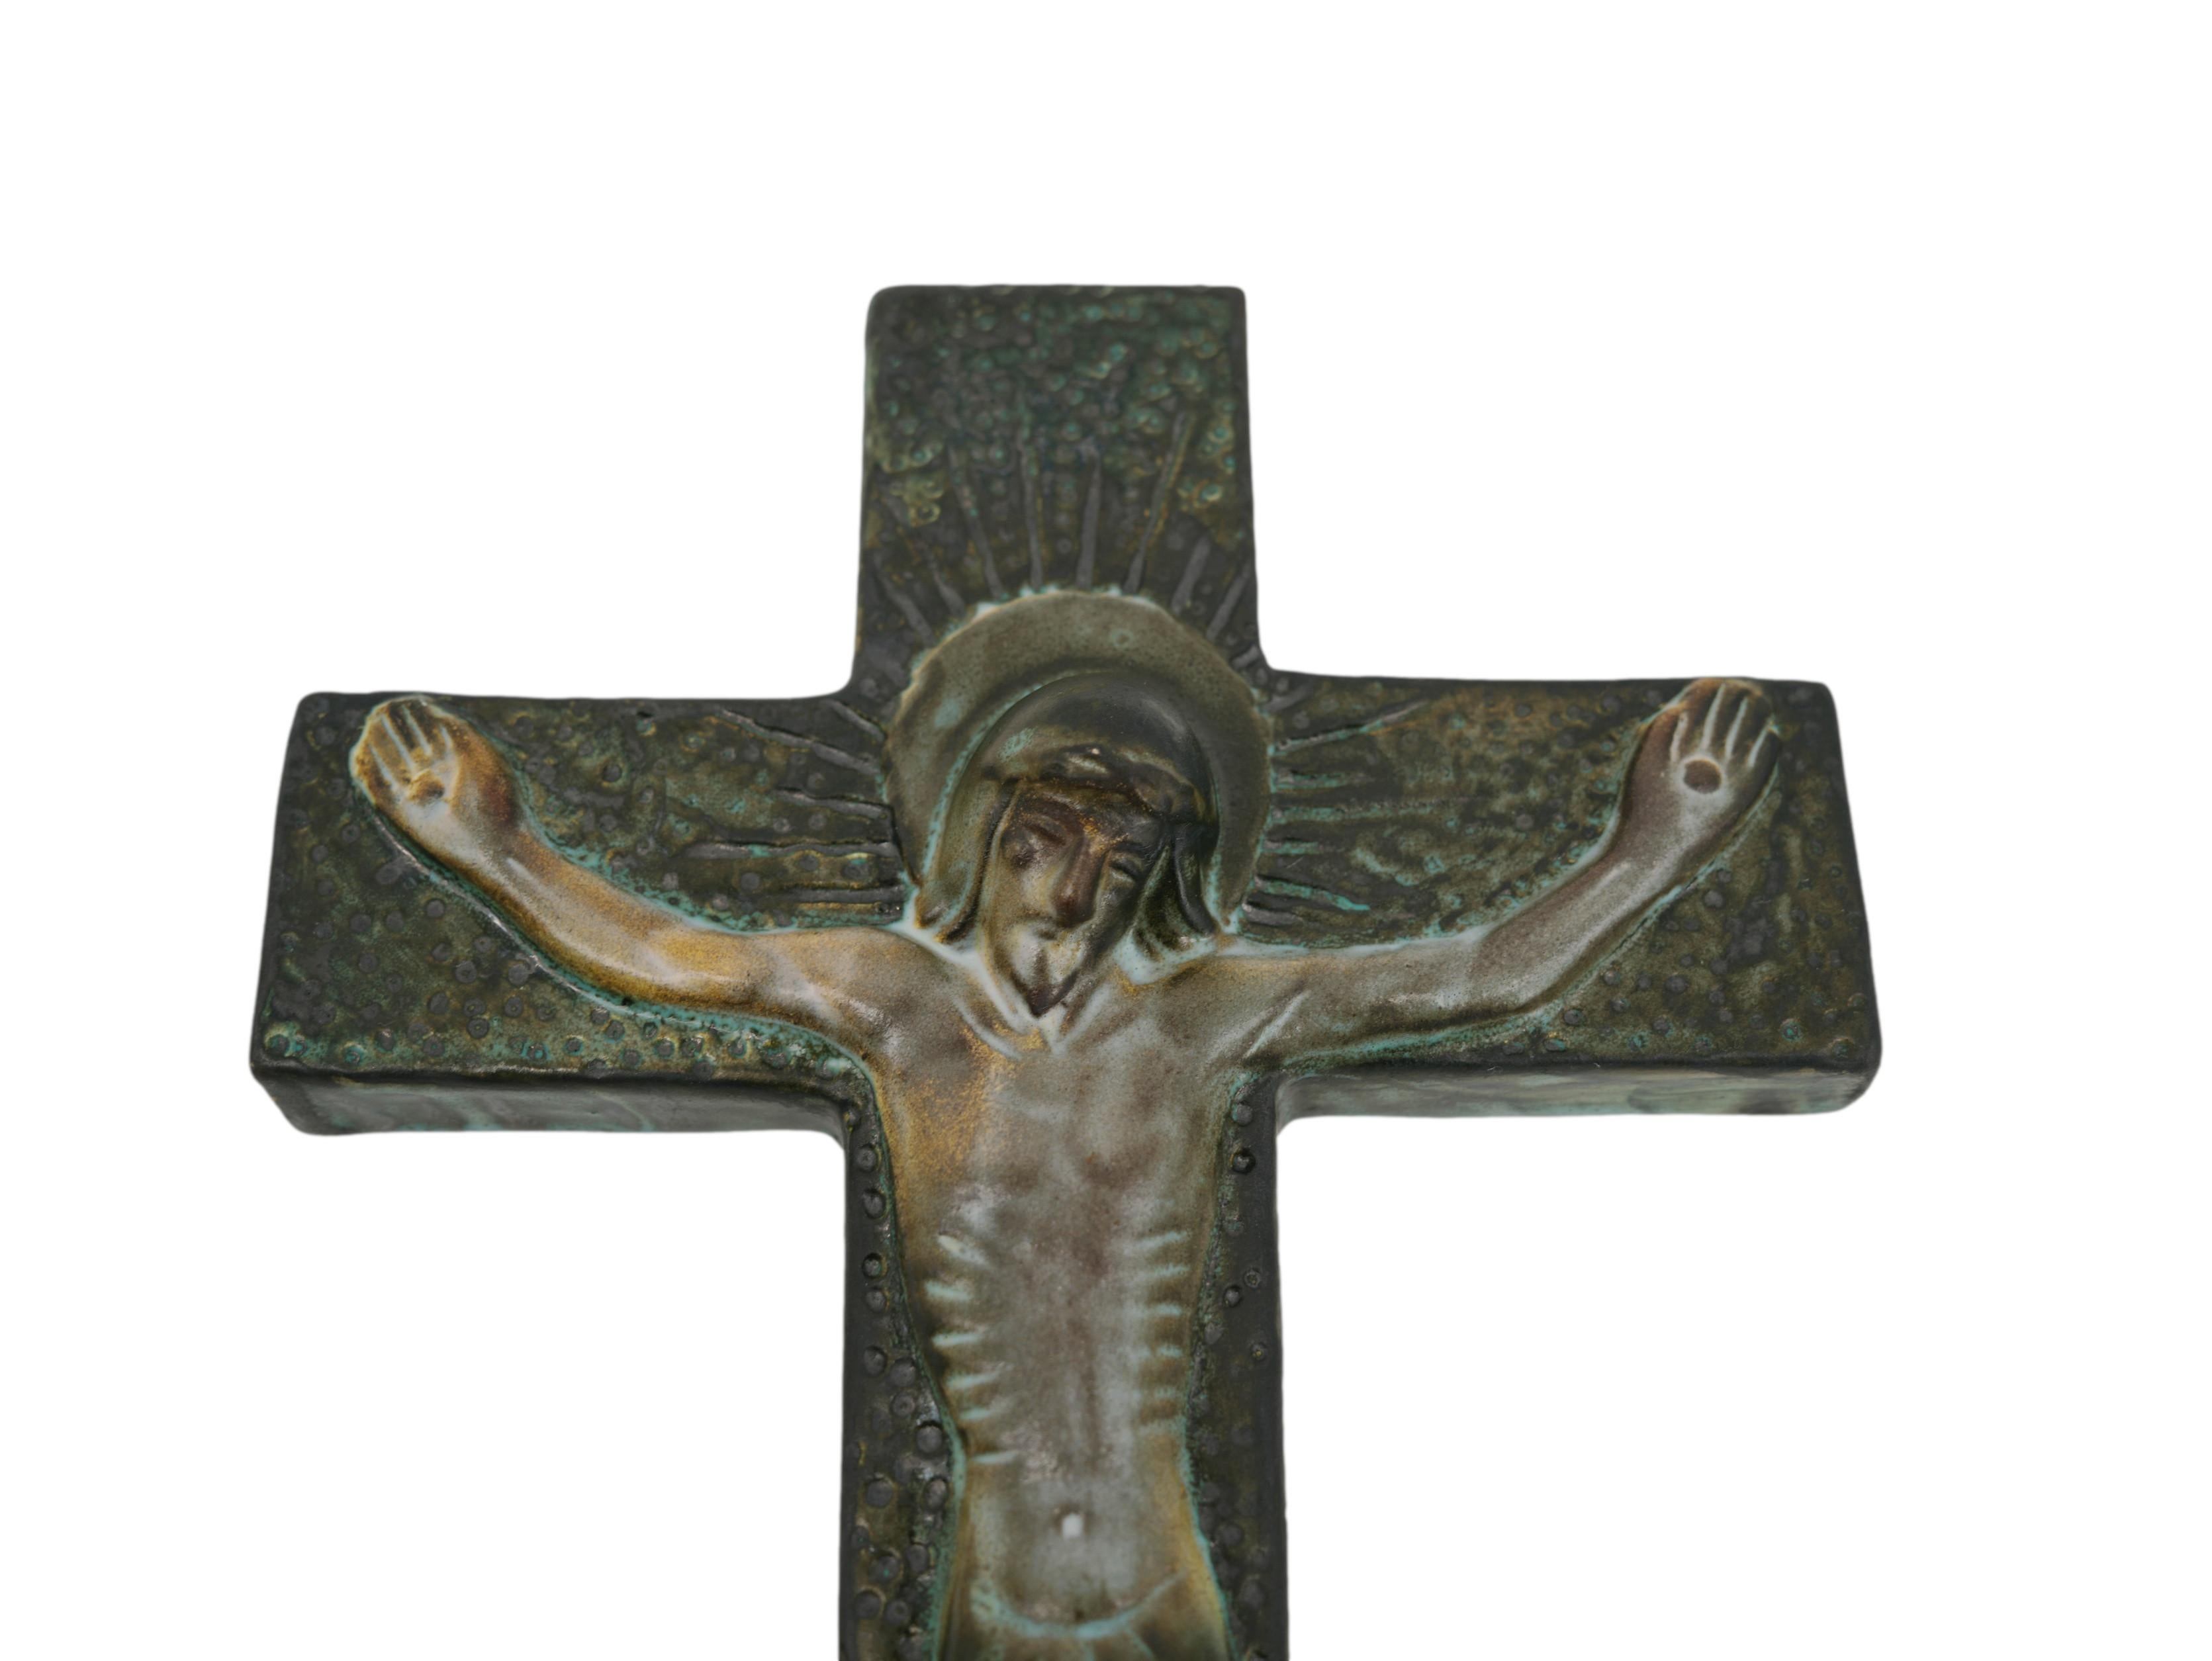 French Mid-century ceramic crucifix, France, 1950s. Exceptional design and quality. Height: 12.3